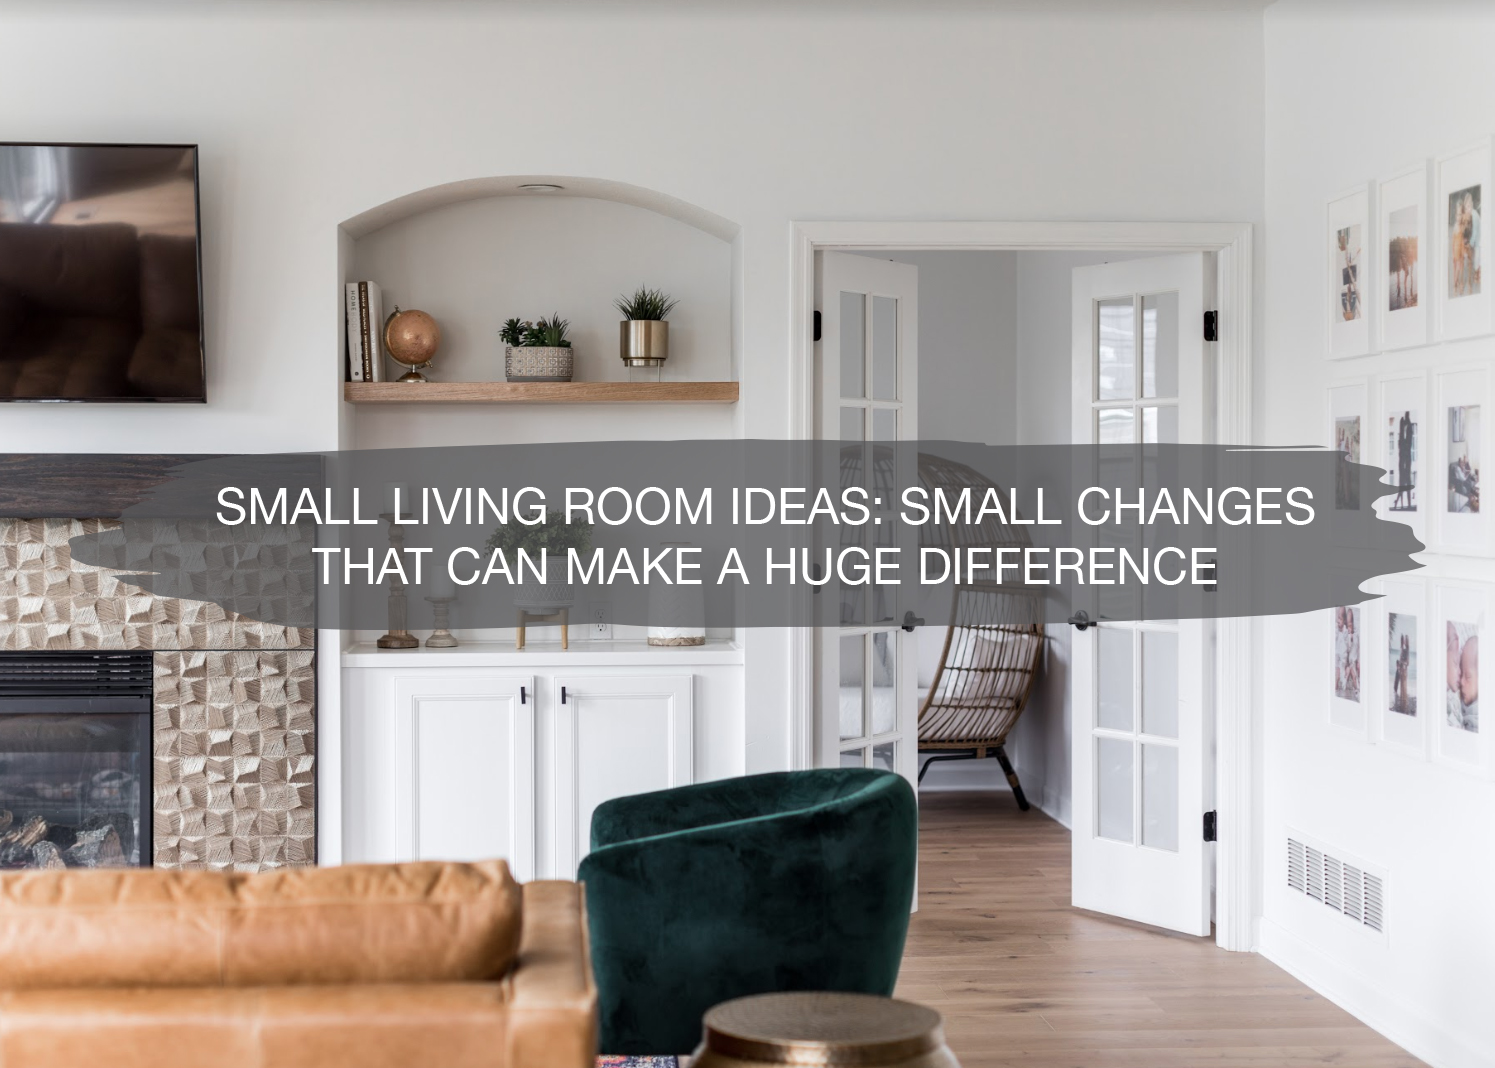 Small Living Room Ideas: Small changes that can make a huge difference | construction2style